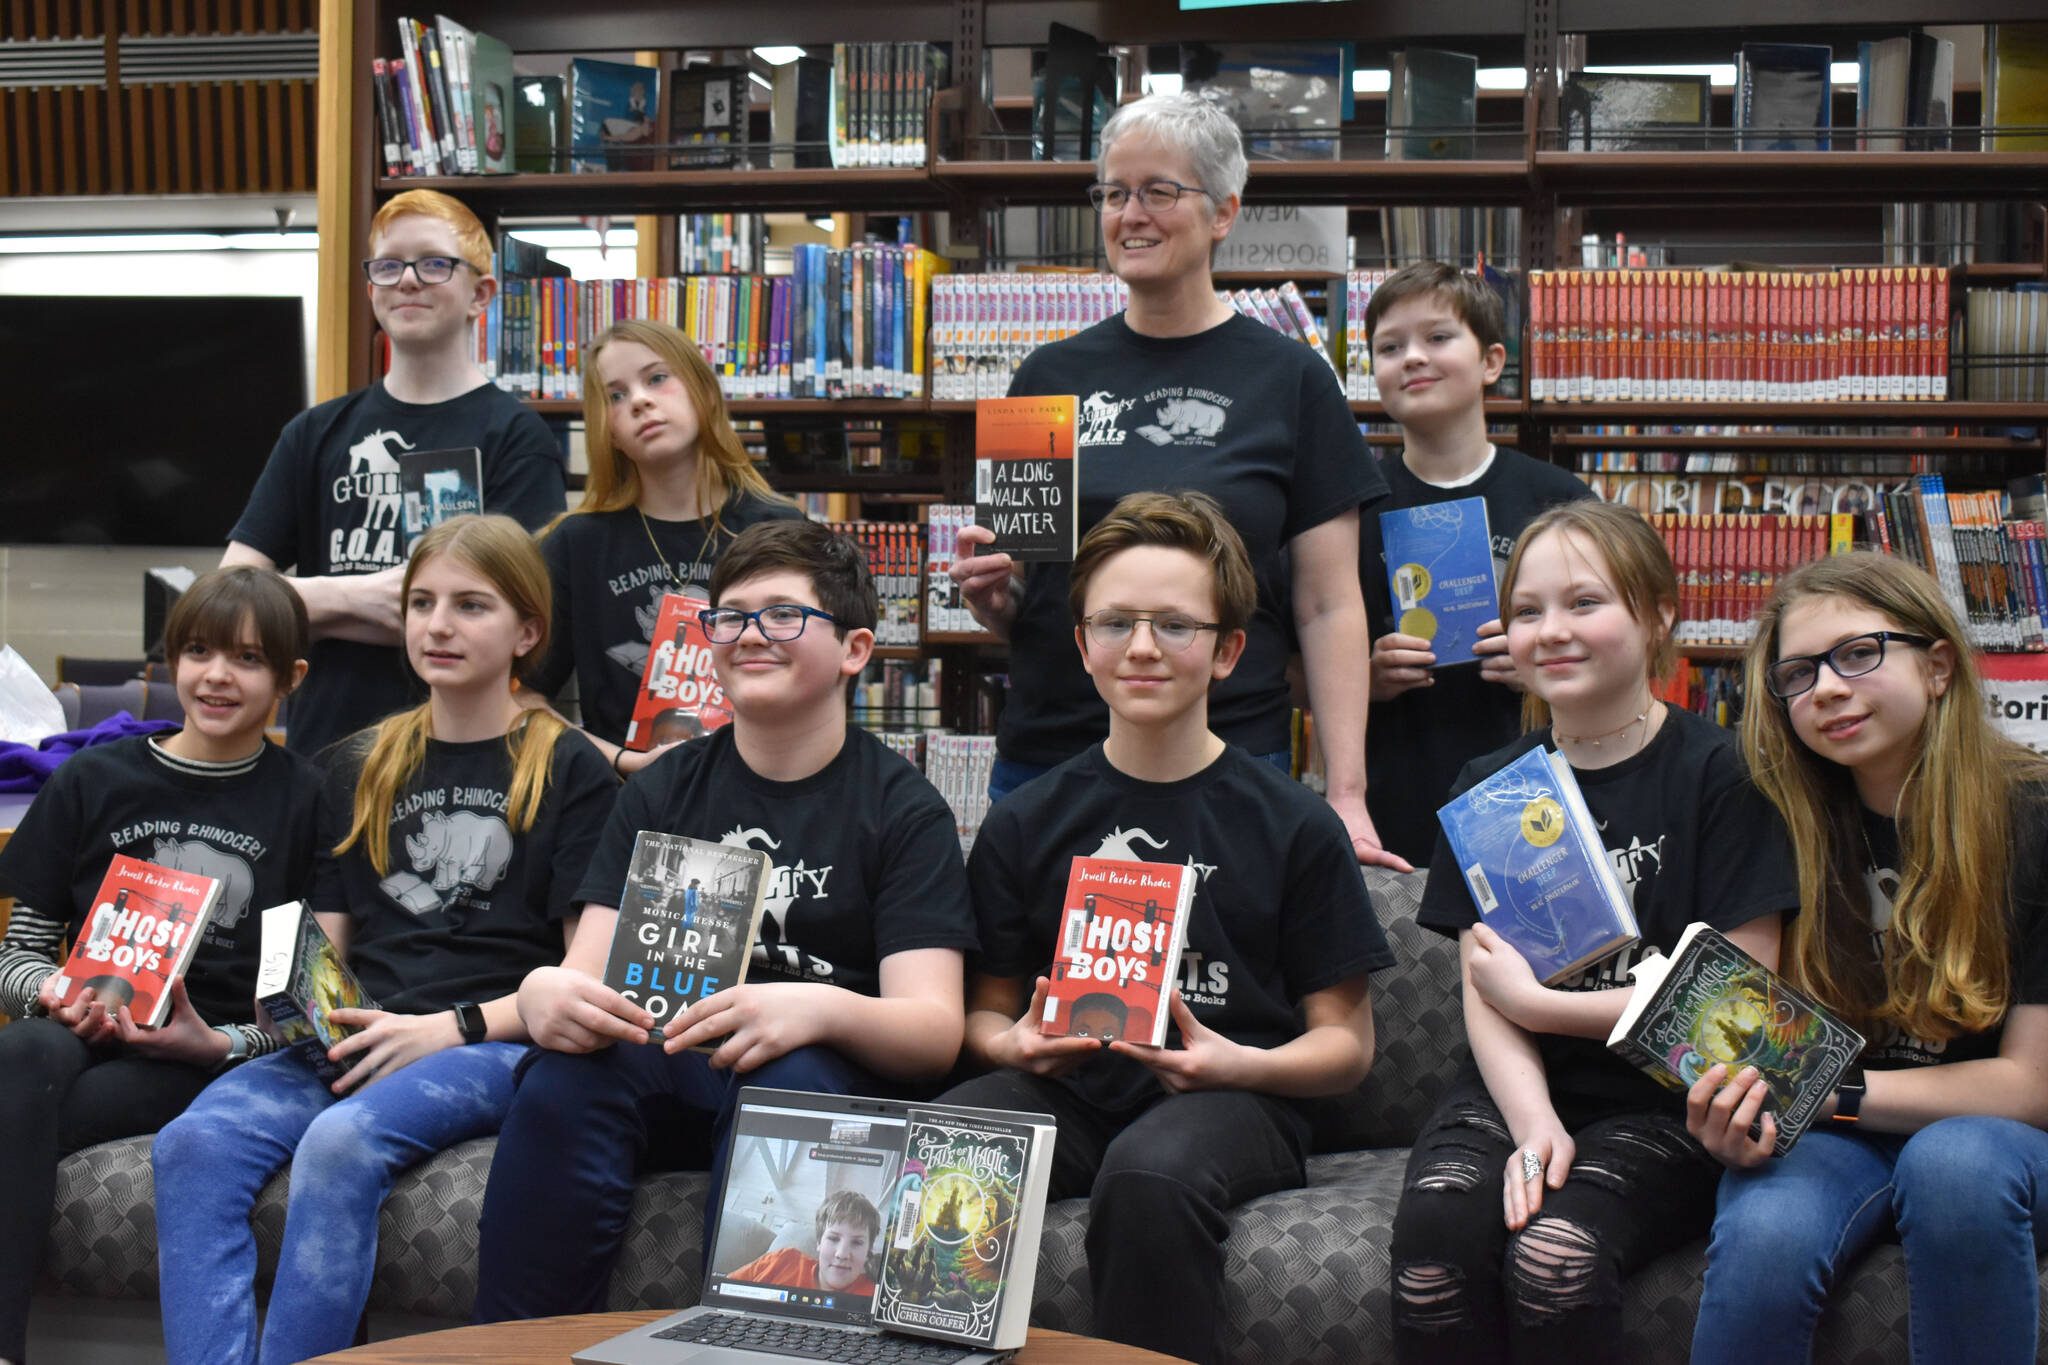 Kenai Middle School Battle of the Books teams, the Reading Rhinoceri and the Guilty GOATs, gather for a photo after their first match during Kenai Peninsula Borough School District Middle School Battle of the Books competition on Thursday, Feb. 9, 2023, at Kenai Middle School in Kenai, Alaska. (Jake Dye/Peninsula Clarion)